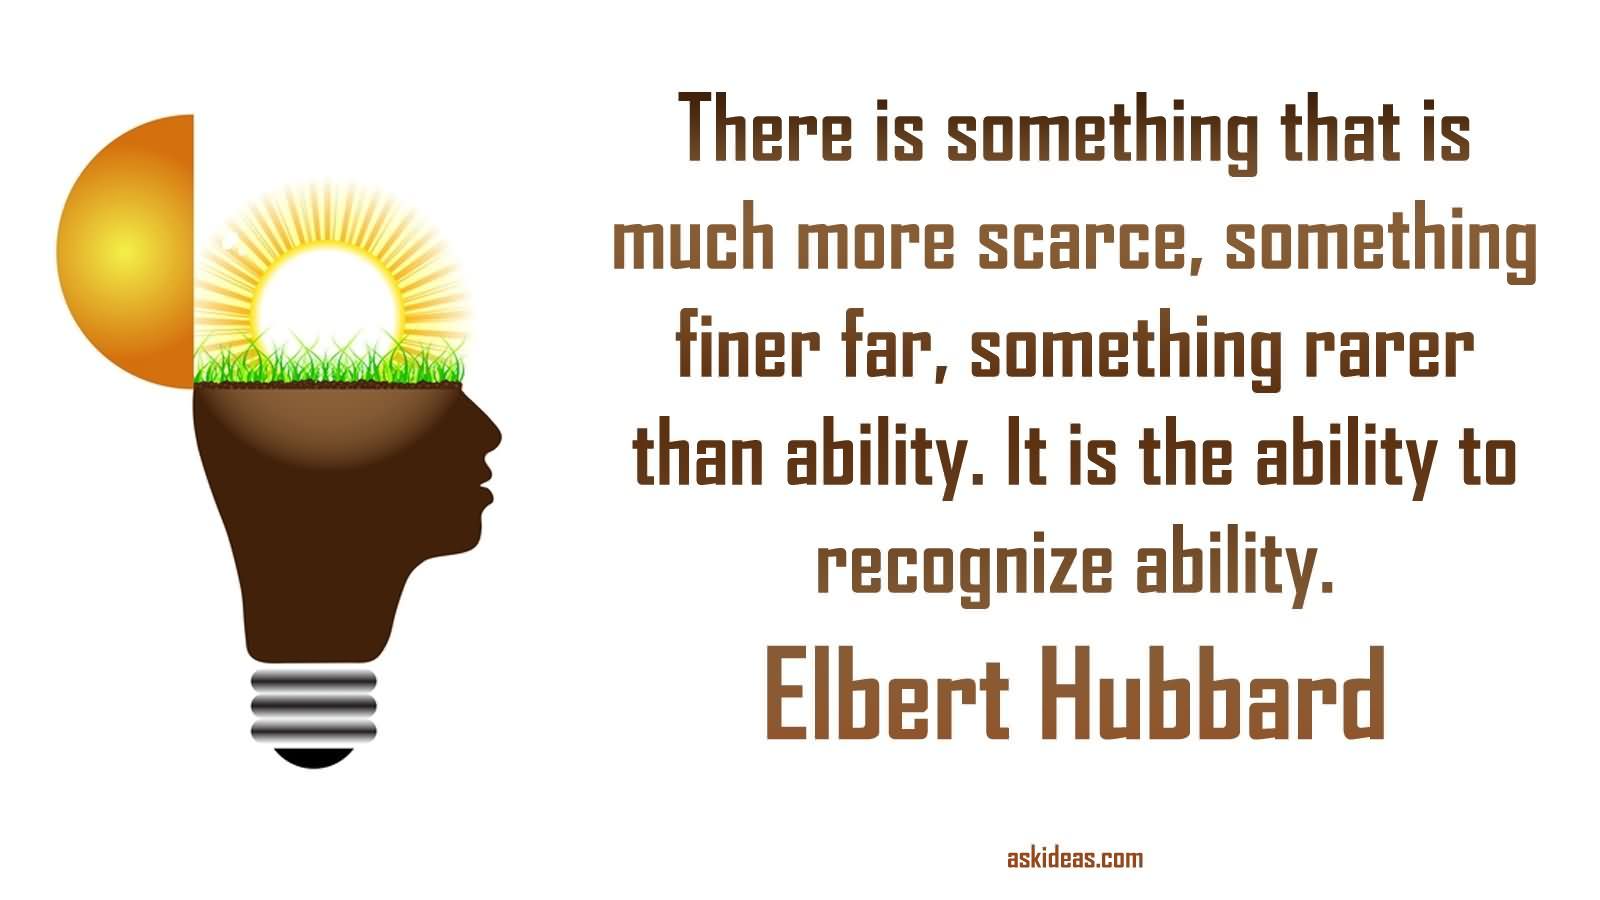 There is something that is much more scarce, something finer far, something rarer than ability. It is the ability to recognize ability.